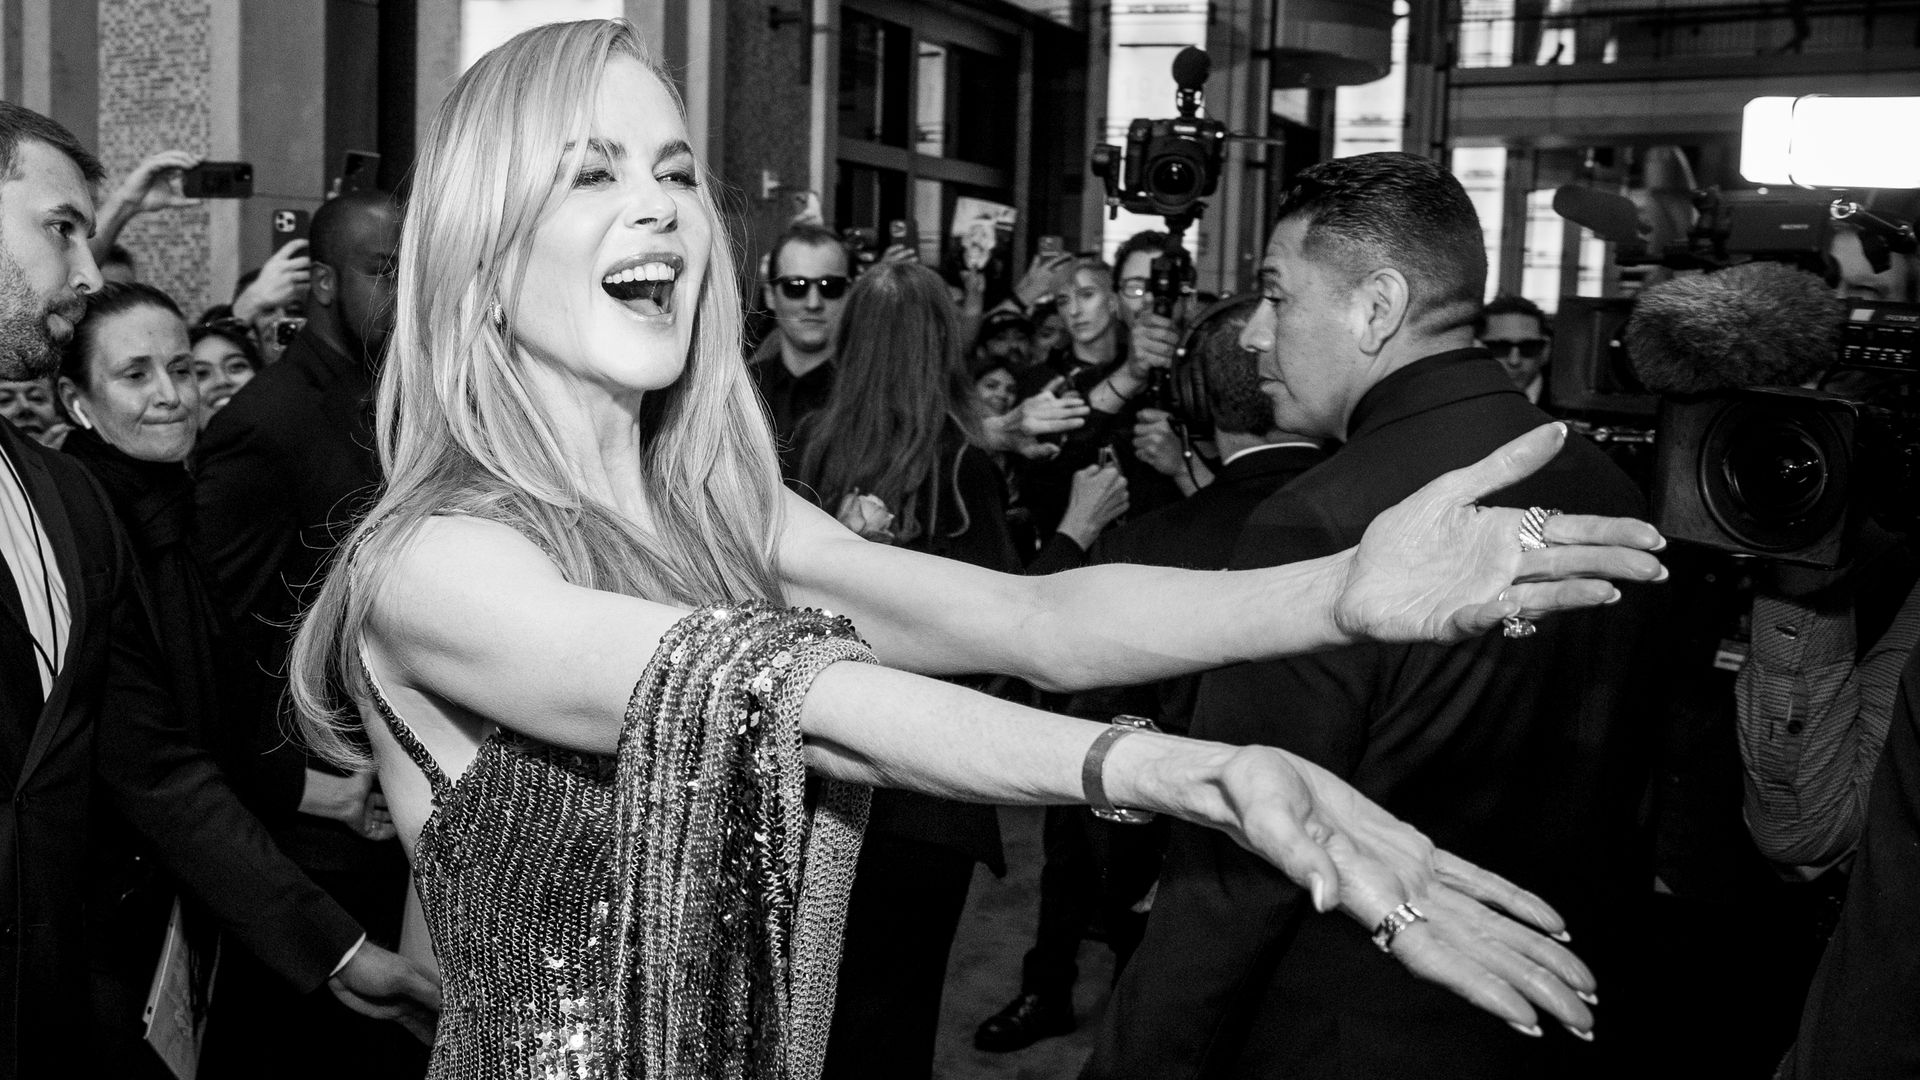 Nicole Kidman's house party with teenage daughters shows she's a super fun parent